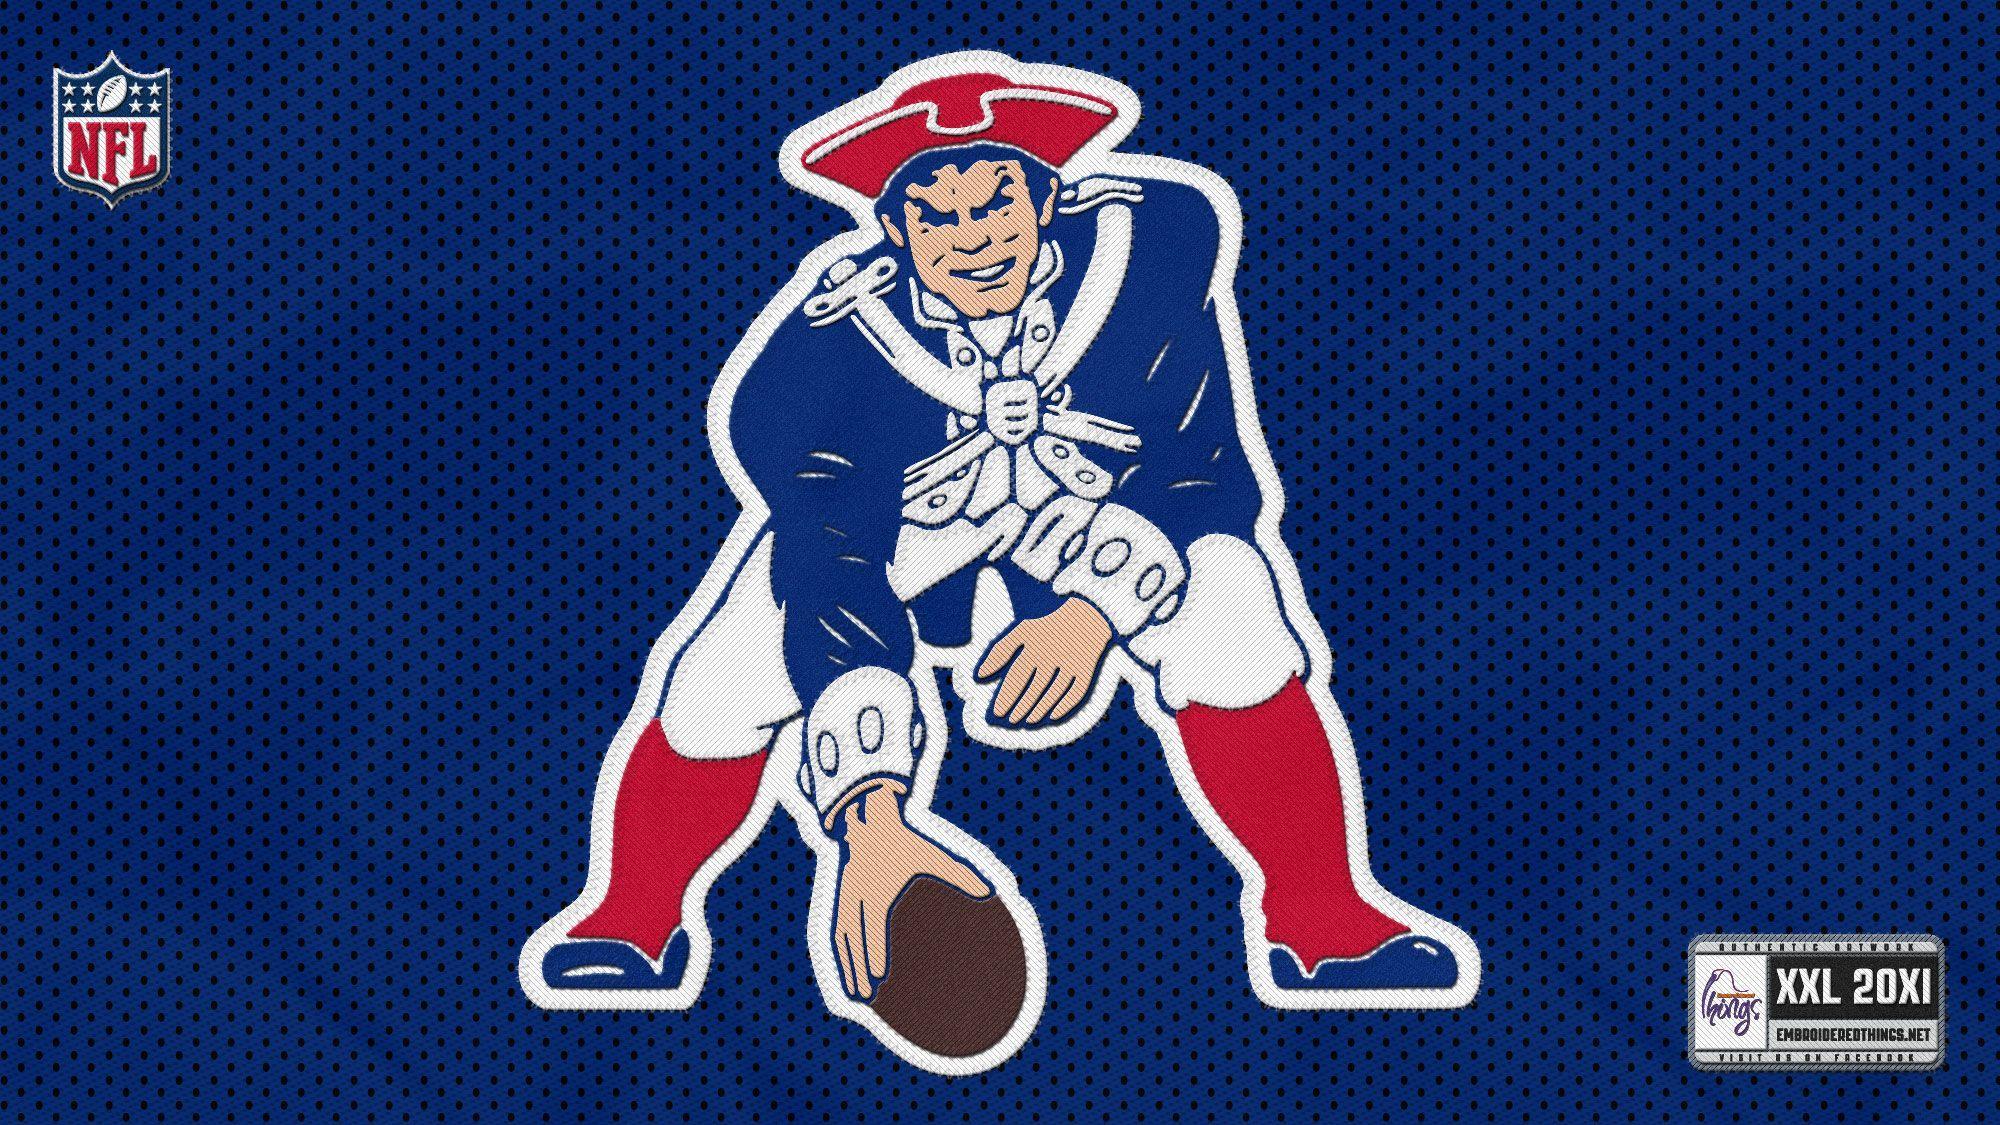 Old Patriots Logo - Old New England Patriots logo. I liked it better than any of the ...